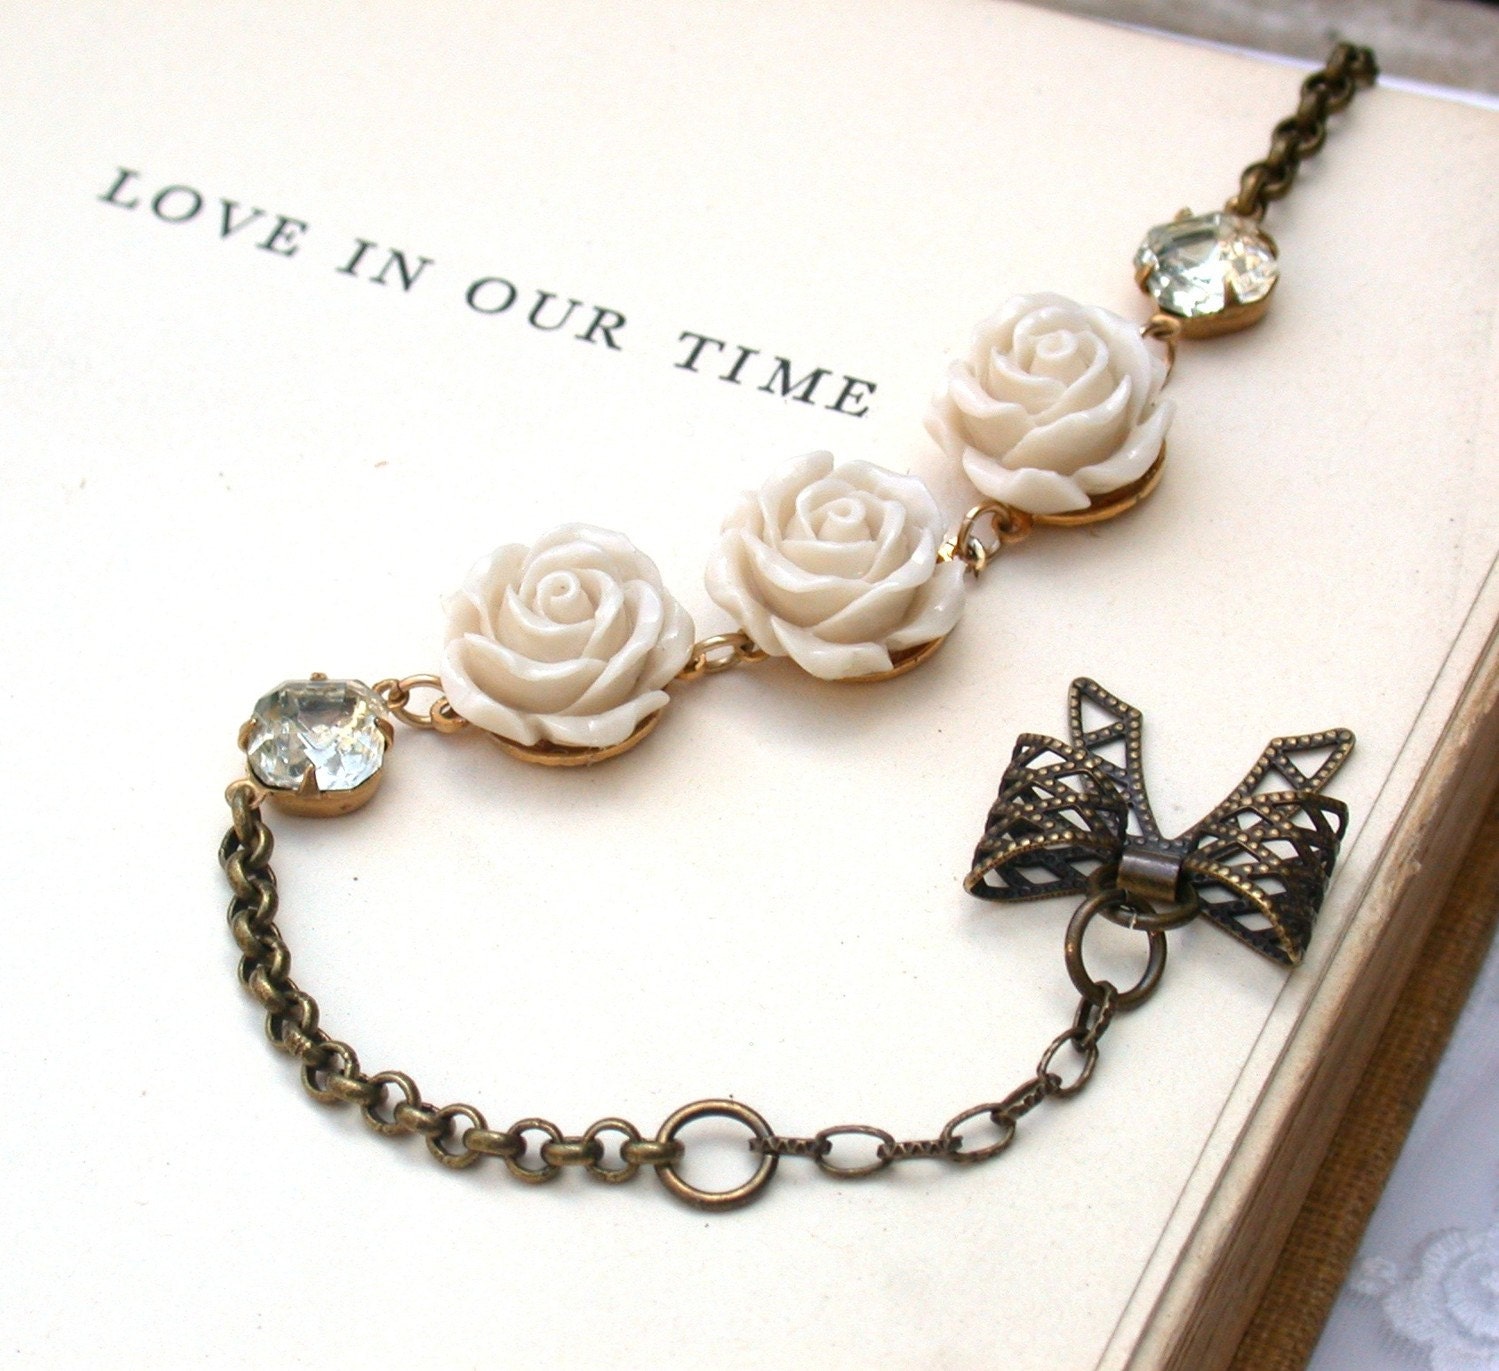 A Vintage Romantic  Glass Clear Crystal Rhinestone And Creamy Roses Bracelet